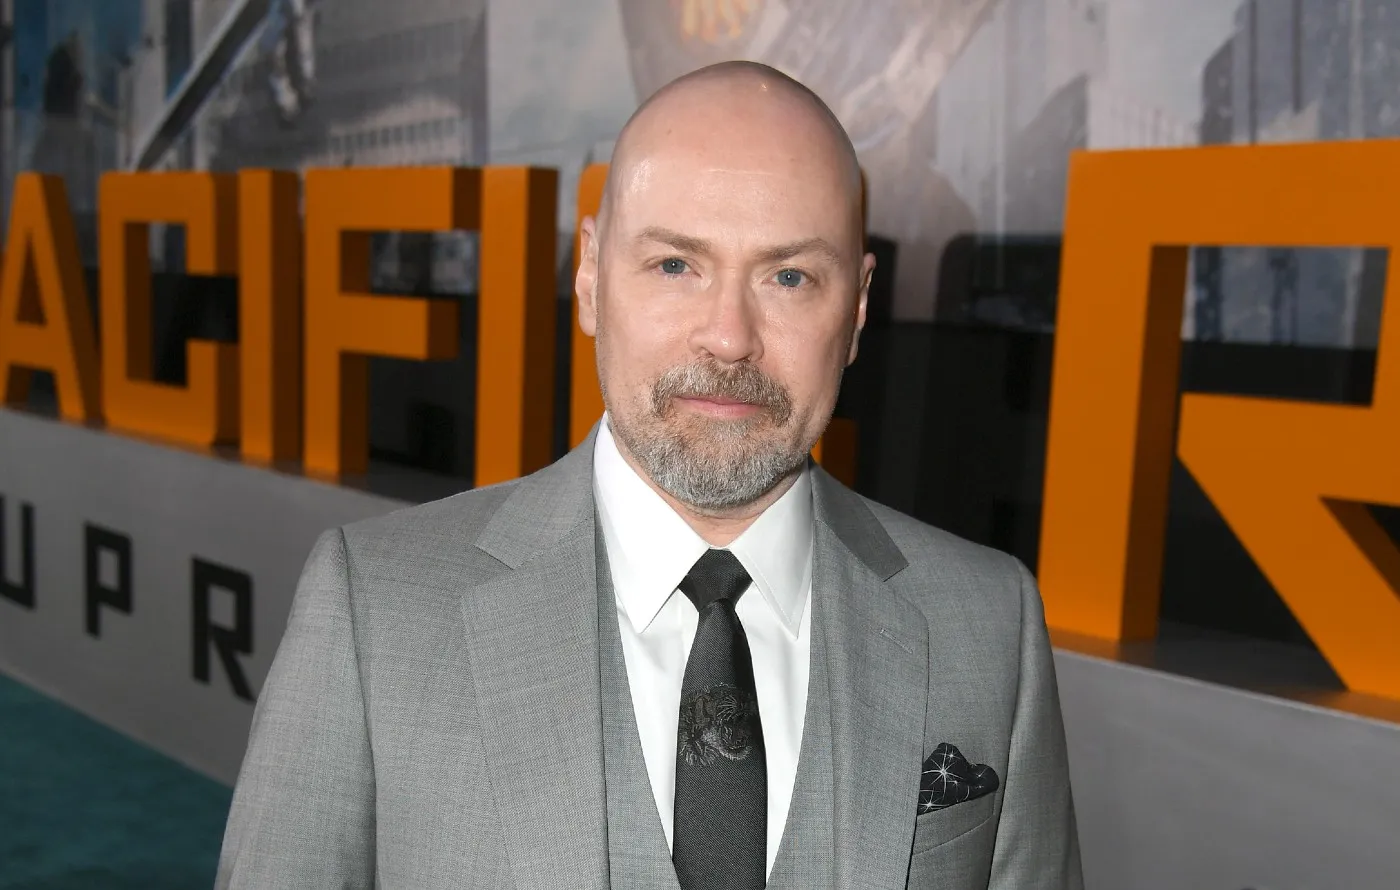 IMDb lists Steven DeKnight as director of ‘Robotech’ and he is understandably baffled